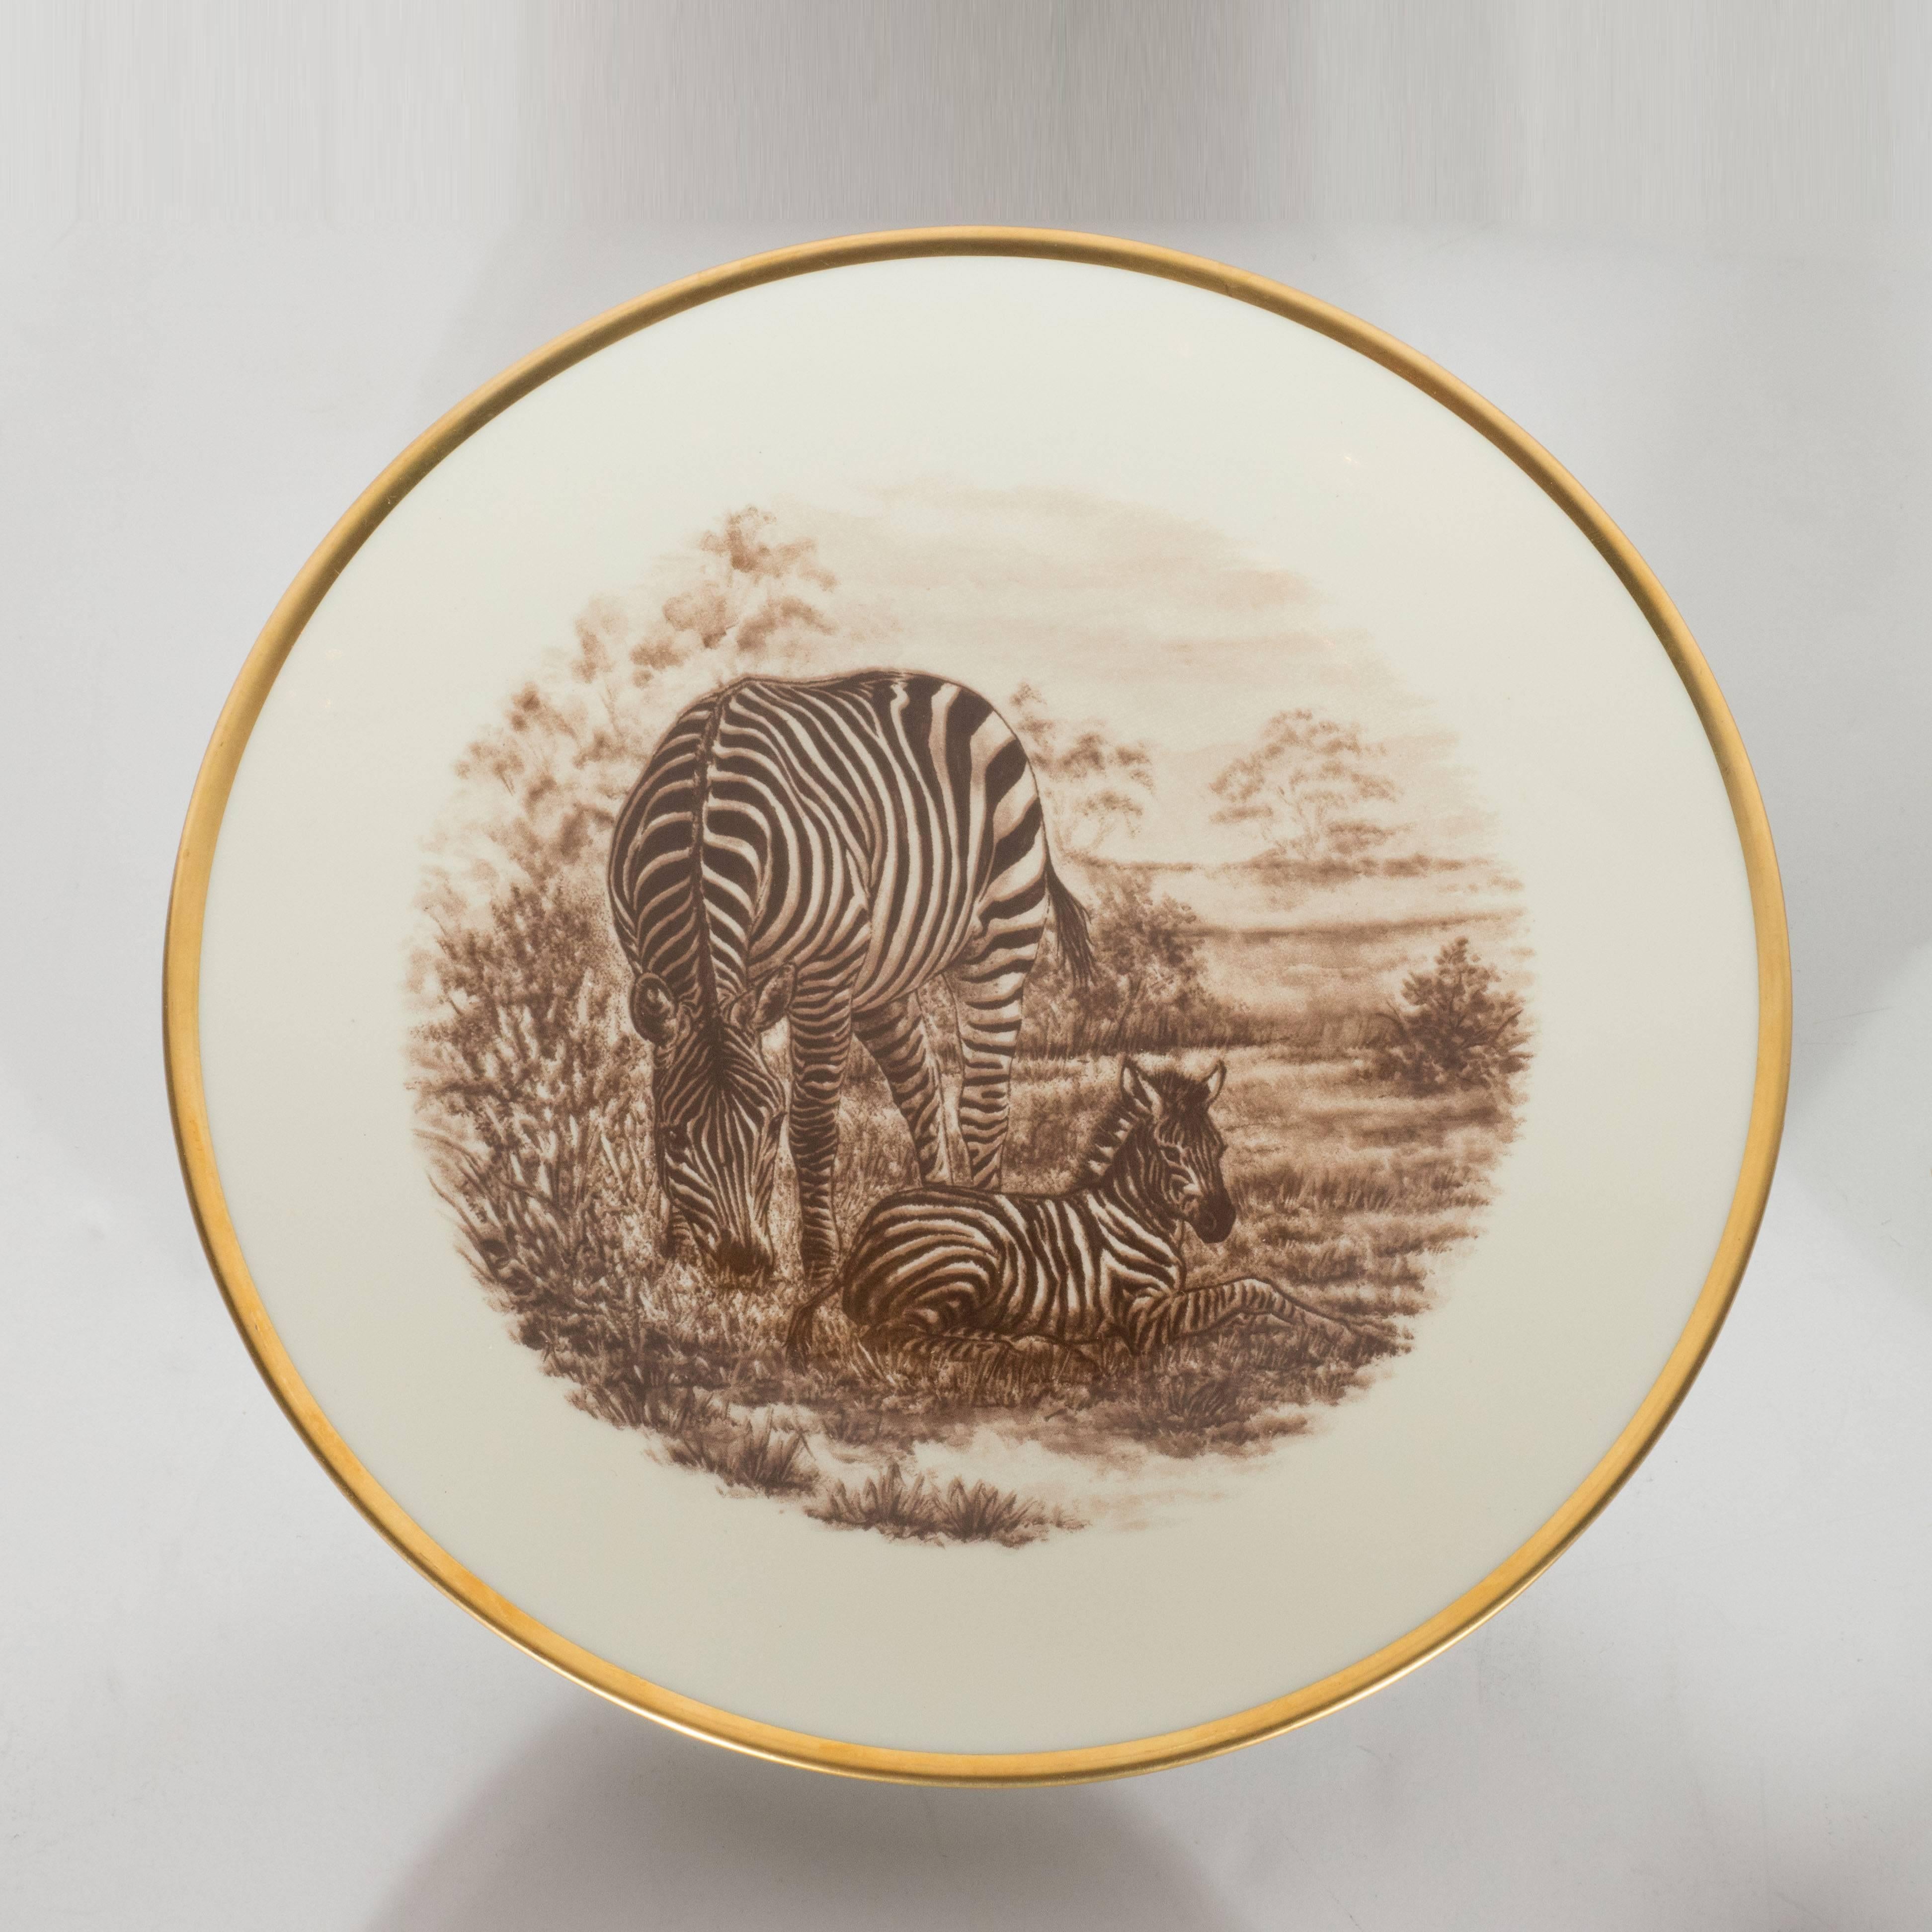 This elegant and whimsical set of six Safari themed plates by the legendary French porcelain manufacturer Limoges features six different kinds of animals from the African savanna- giraffes, monkeys, lions, zebras, cheetahs and elephants- in sepia